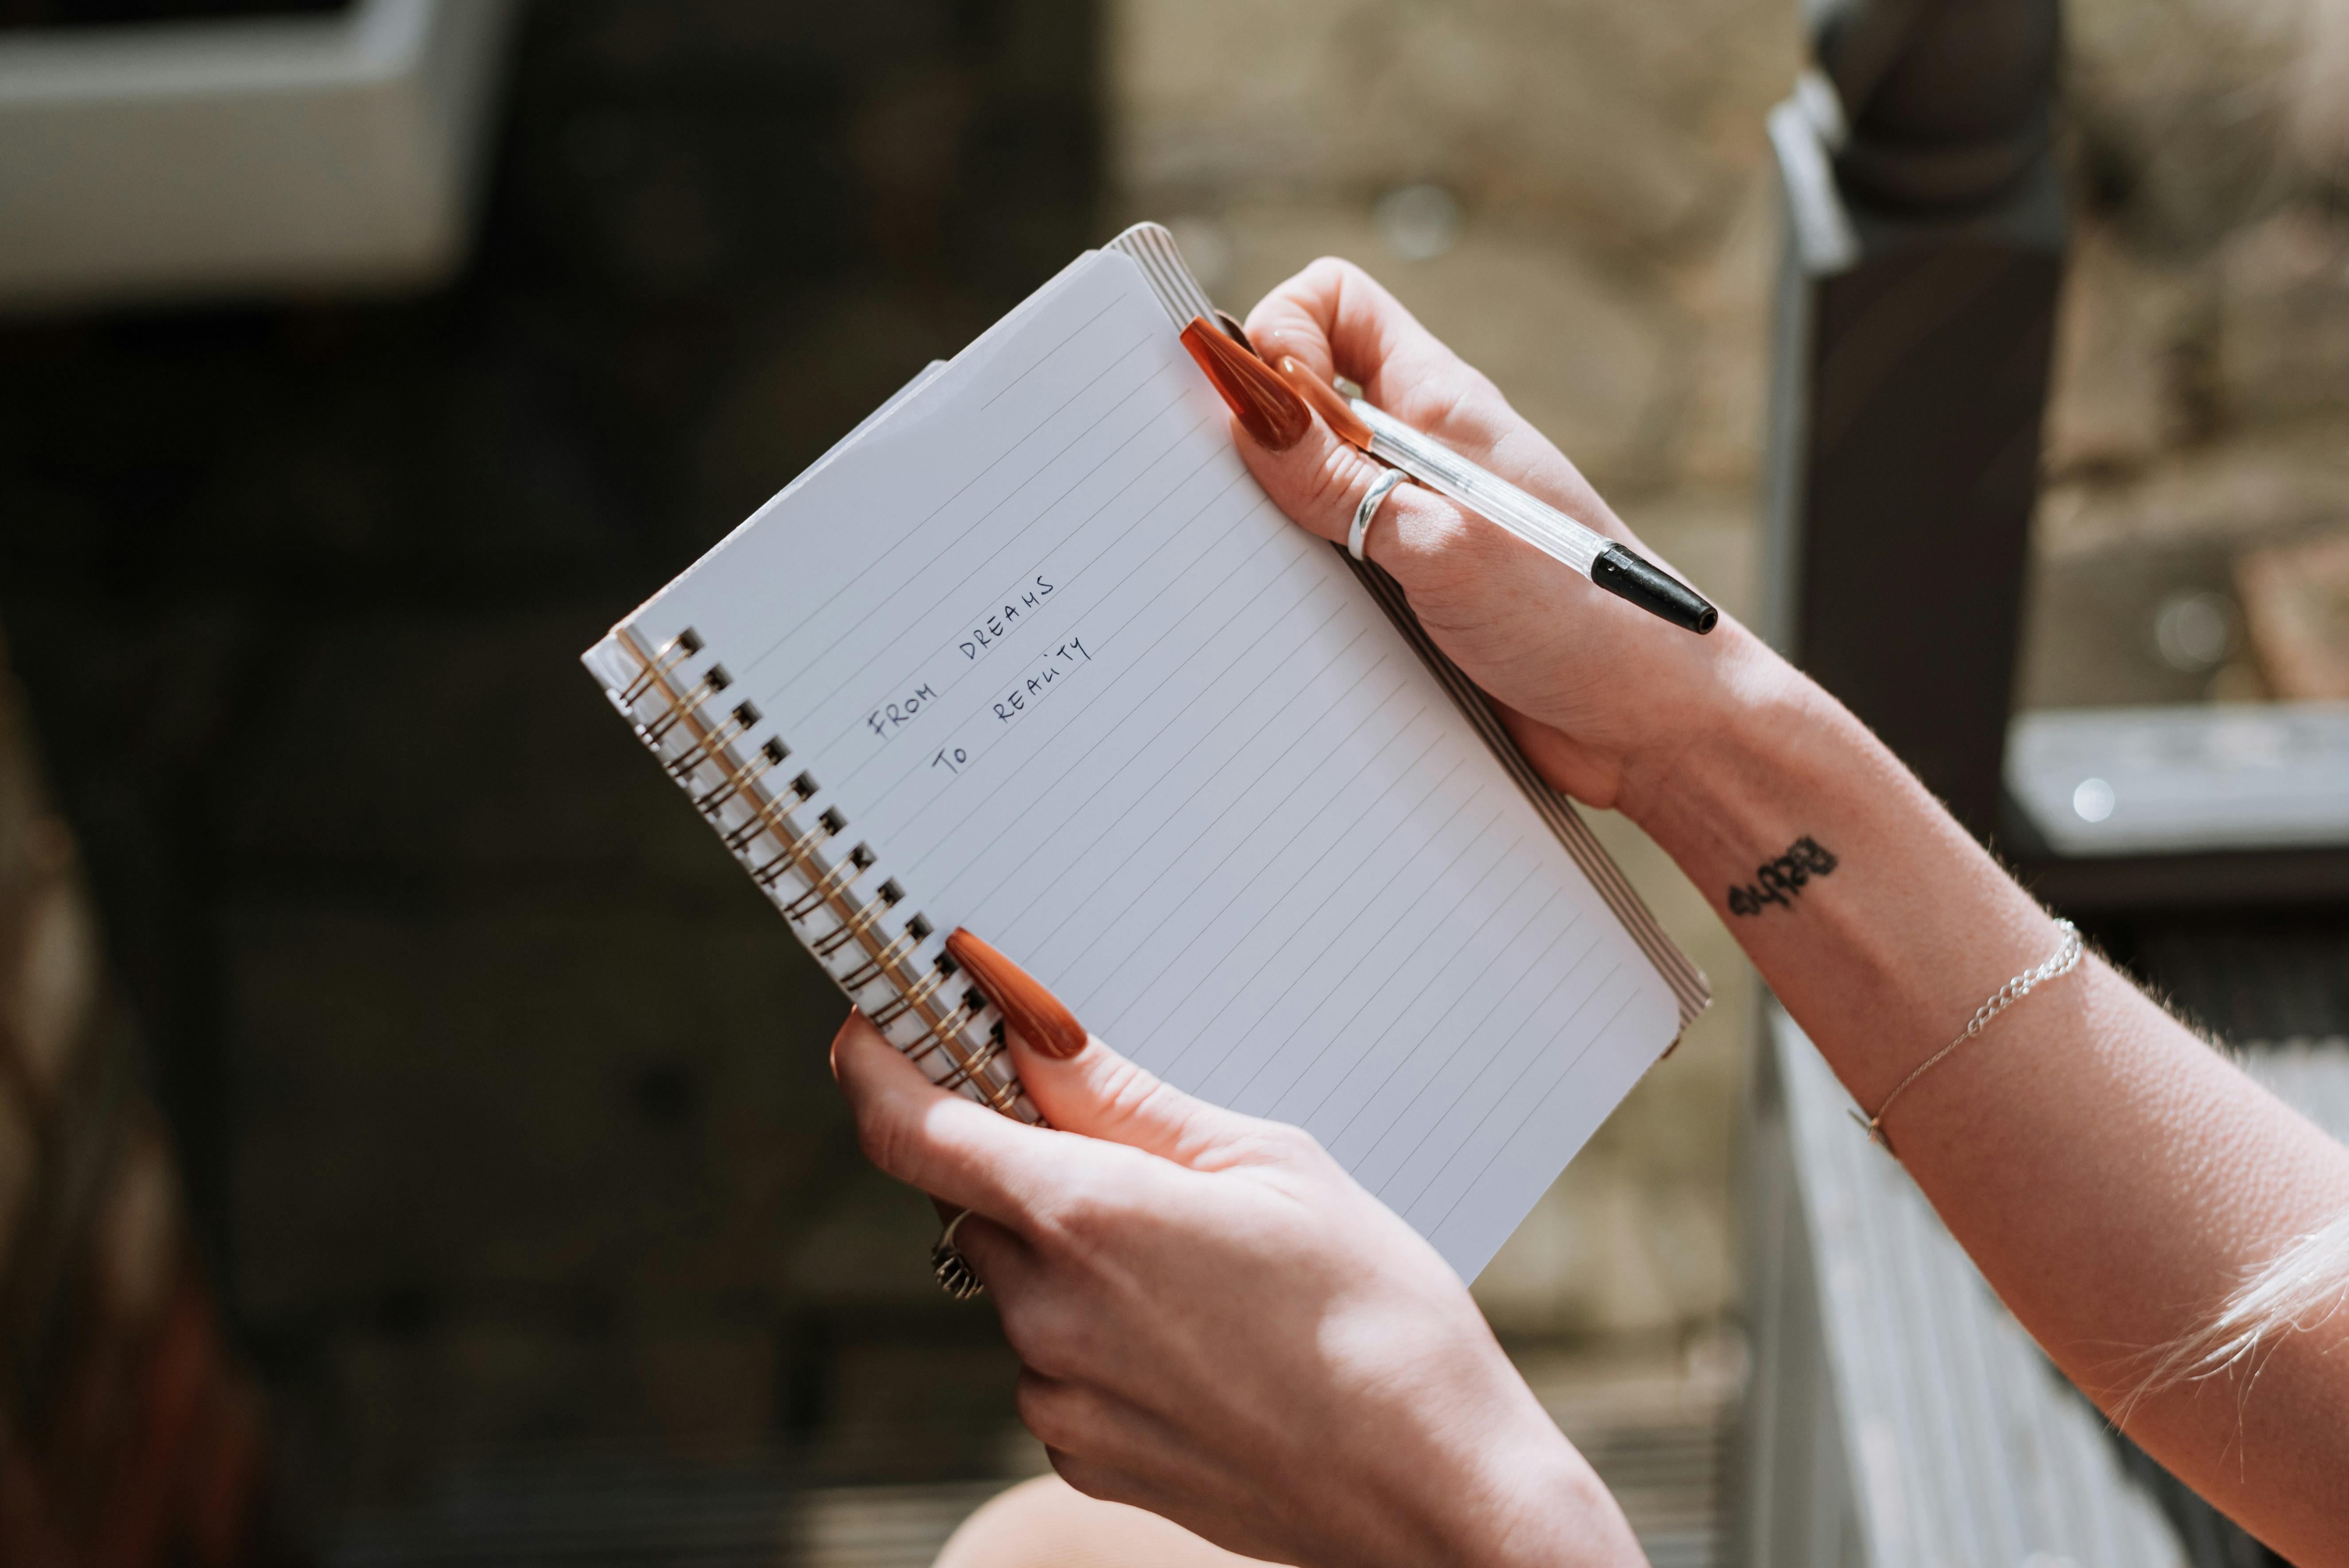 A woman holding up a notebook | Source: Pexels